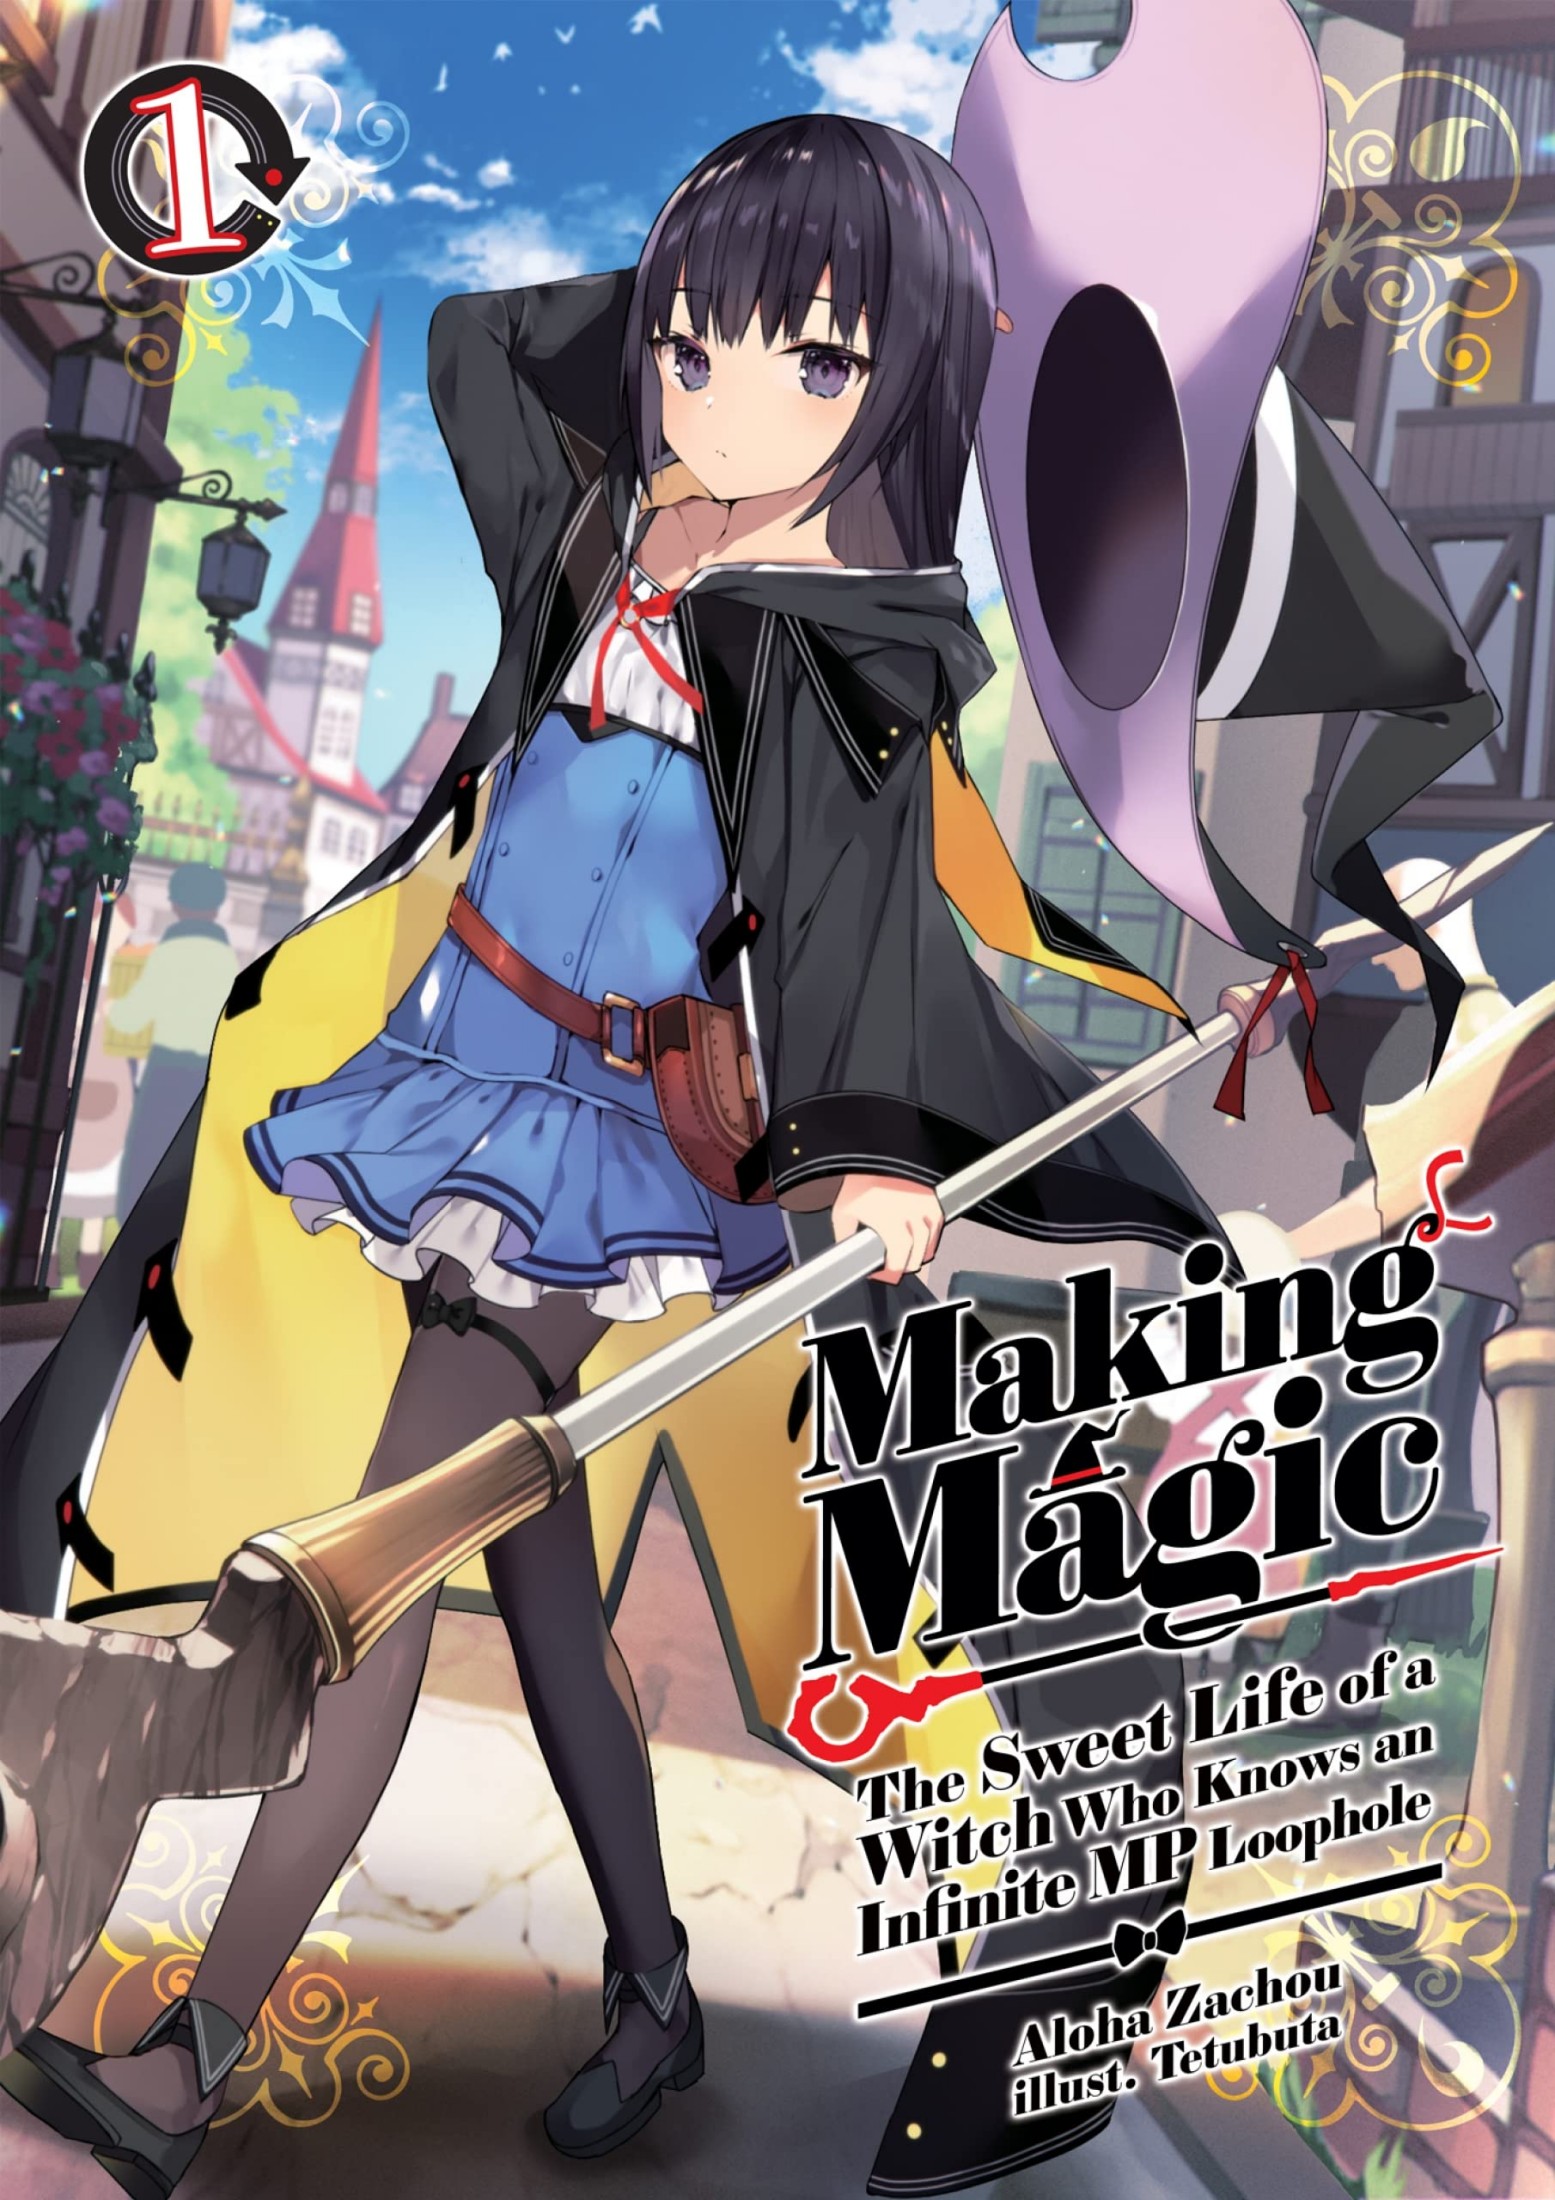 Making Magic: The Sweet Life of a Witch Who Knows an Infinite MP Loophole #001